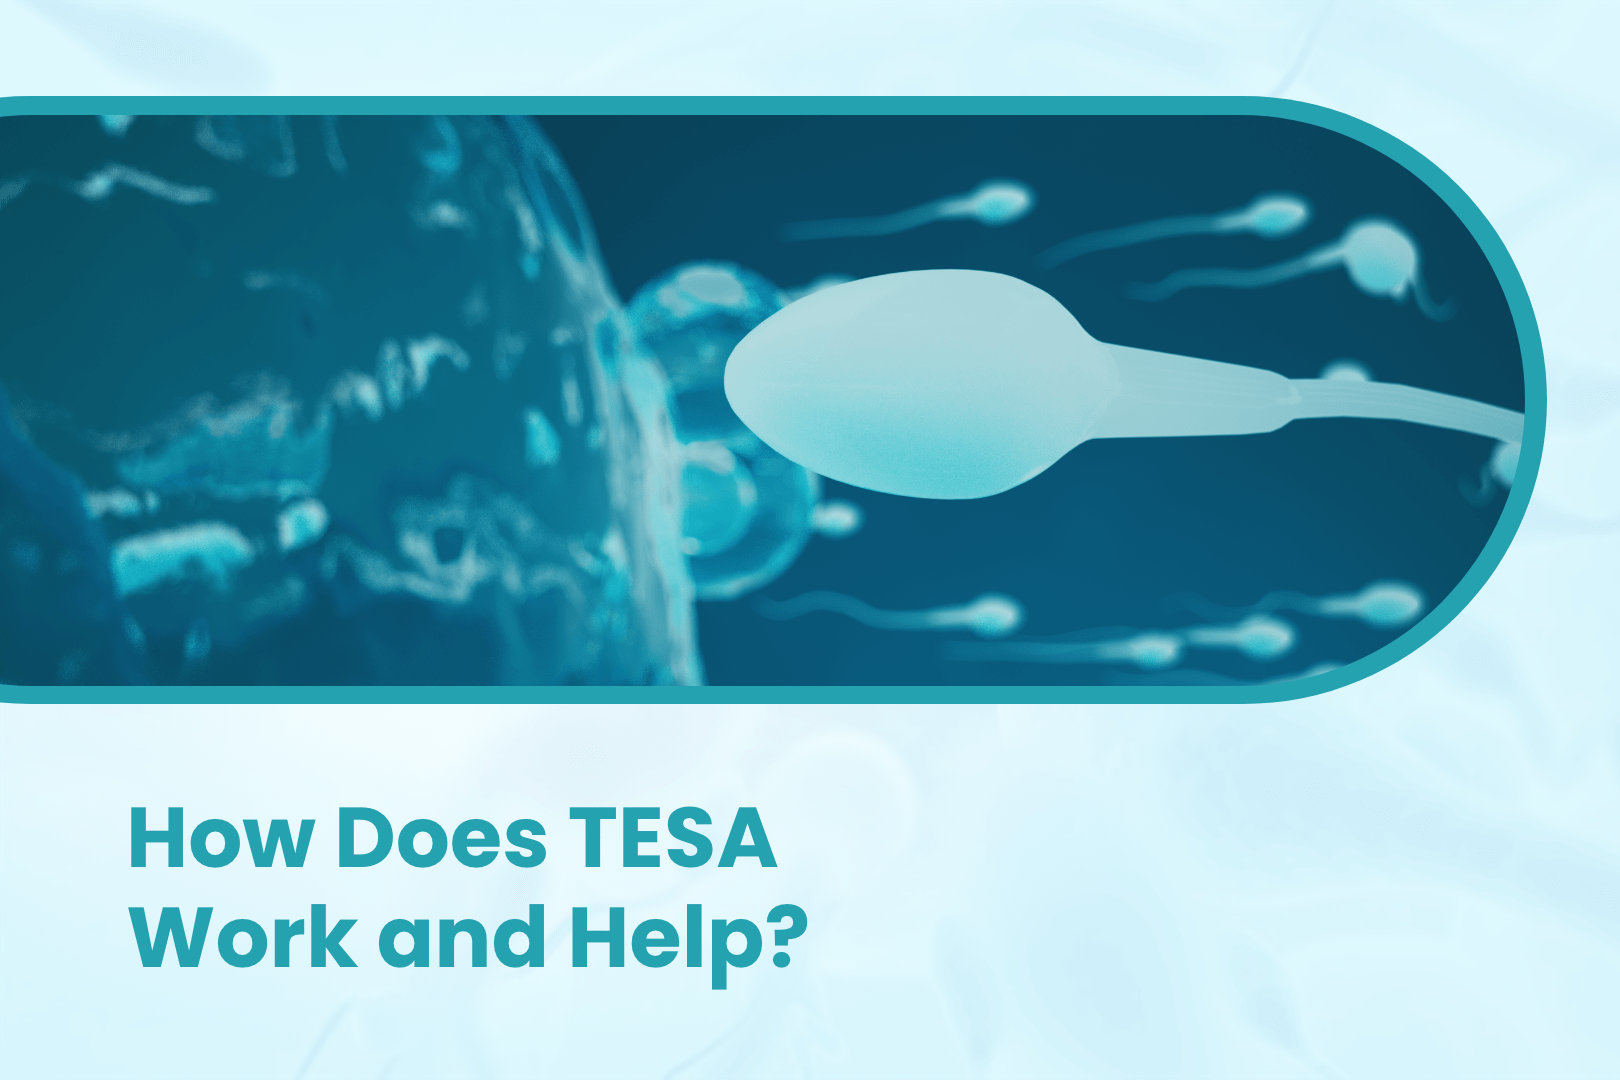 How Does TESA Work and Help?